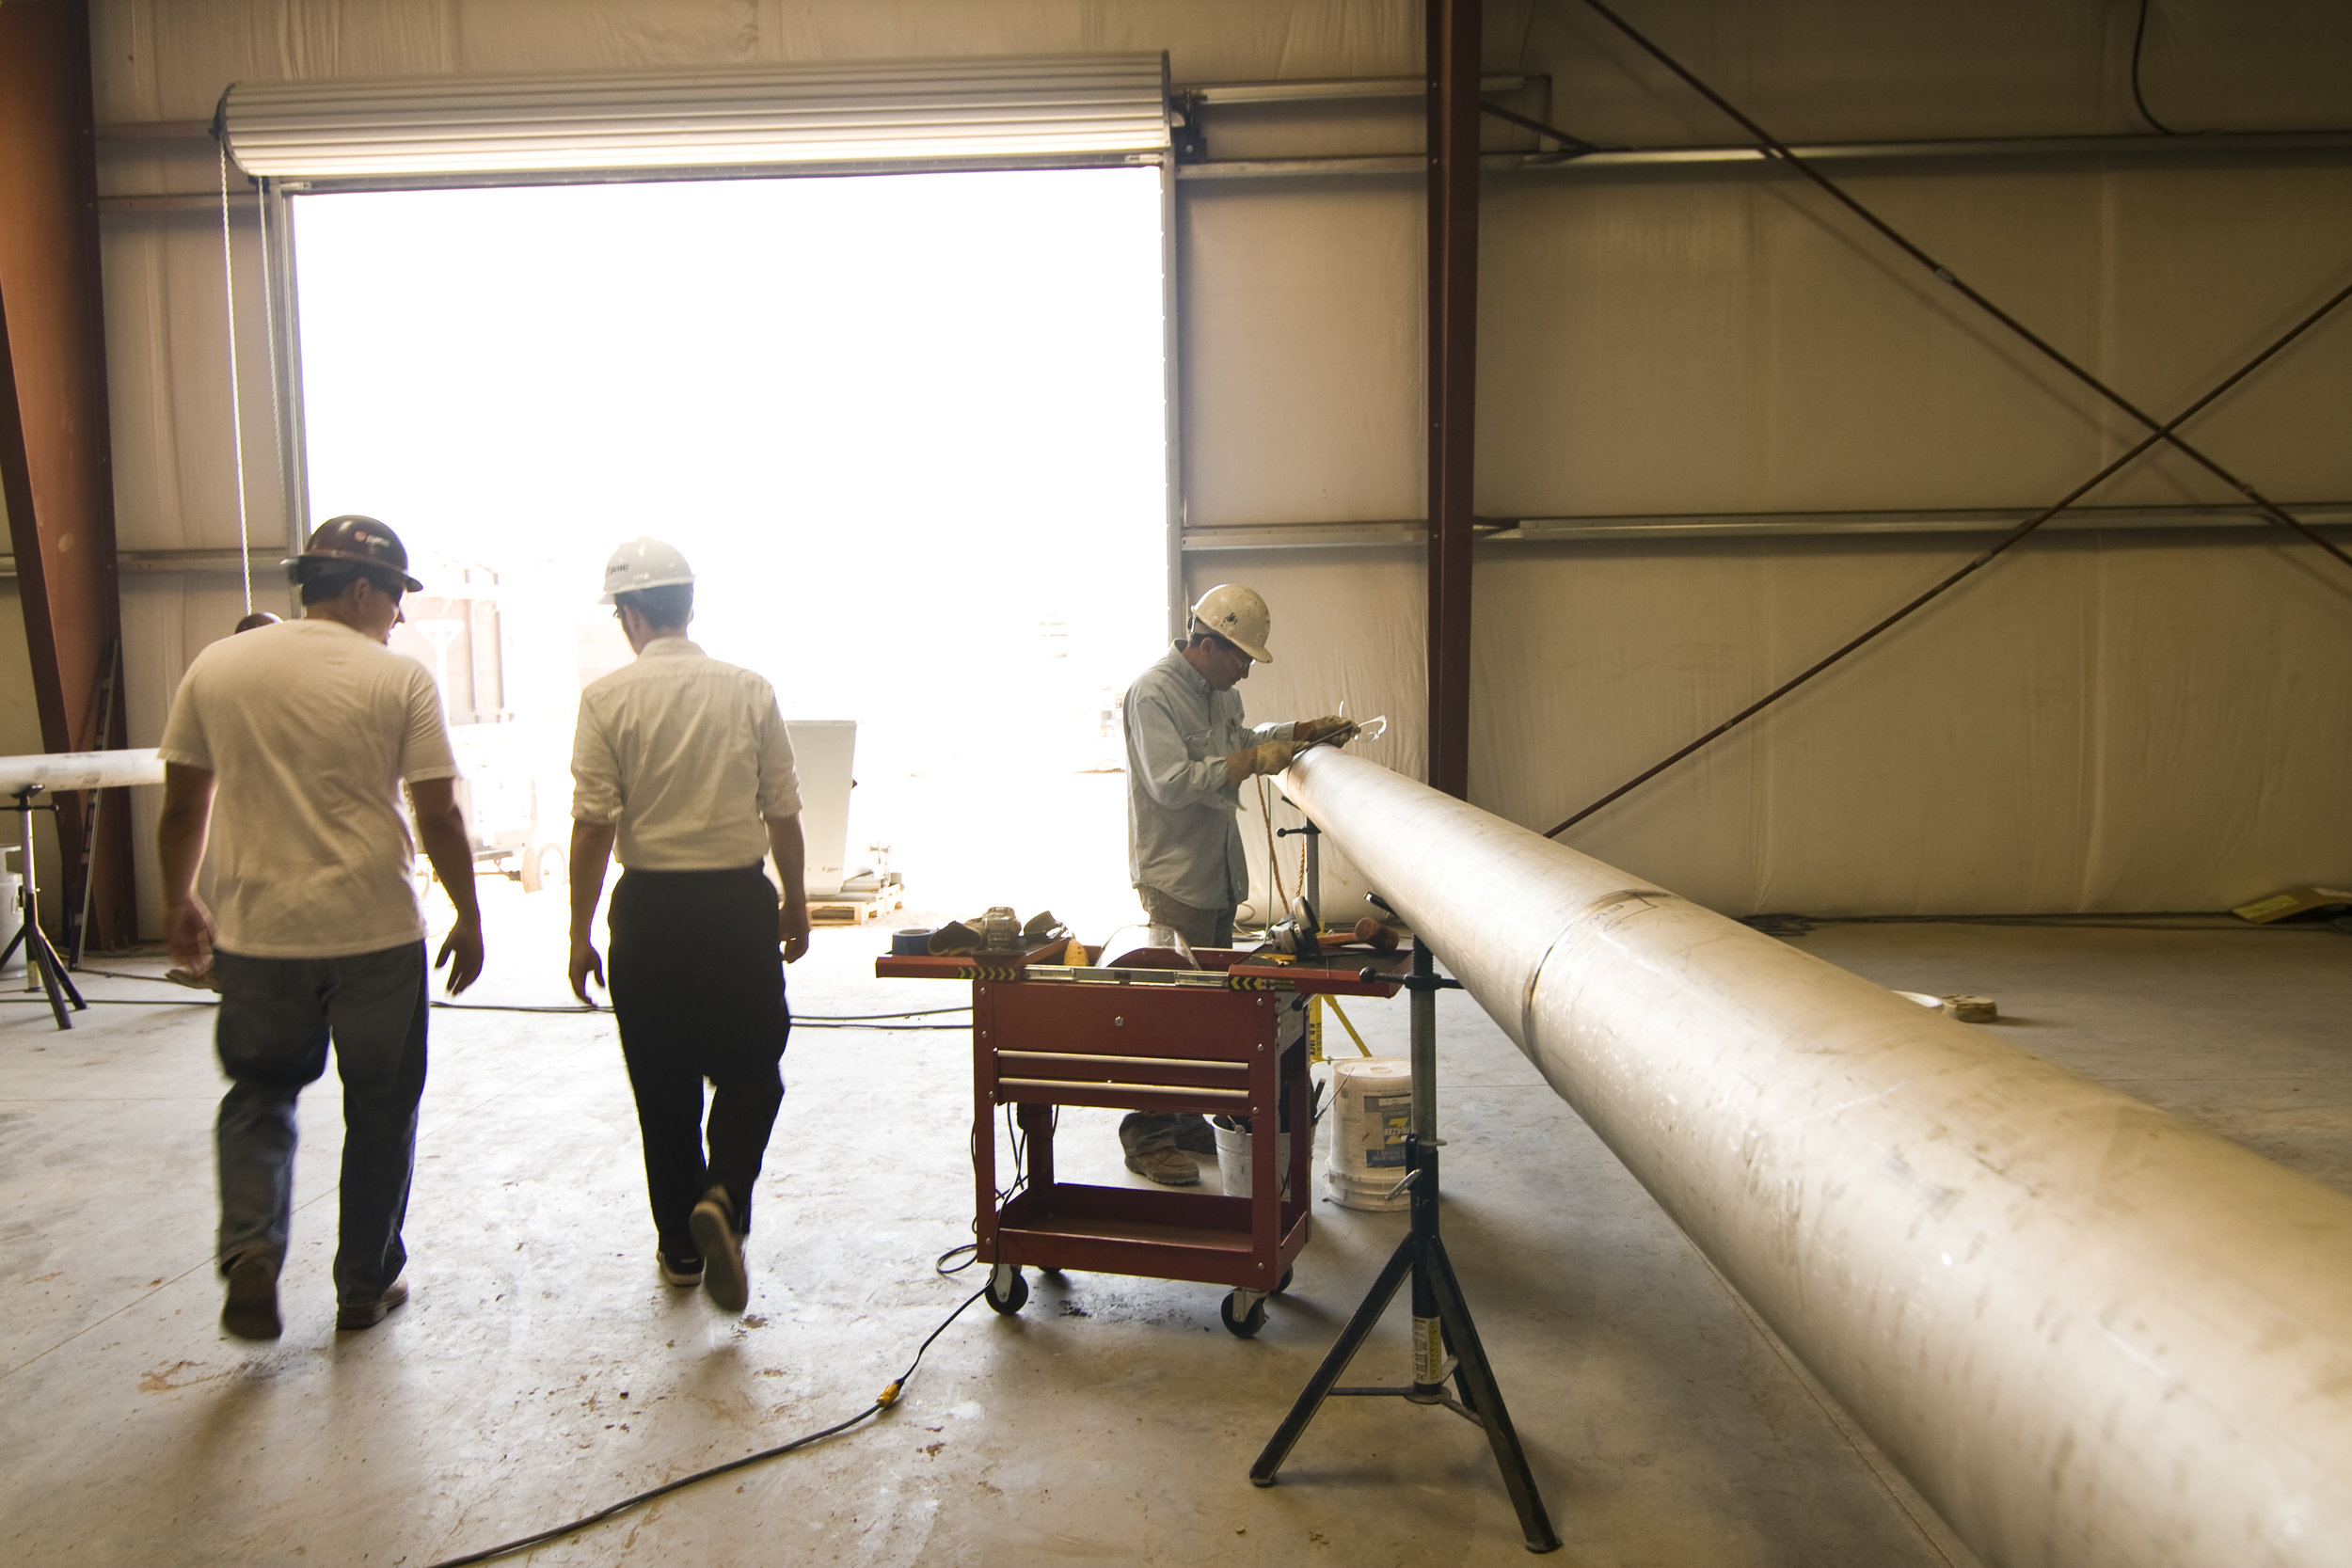  Large doors bring lots of sun into the space. In this back part of the warehouse, workers fabricate specialty pipes. 